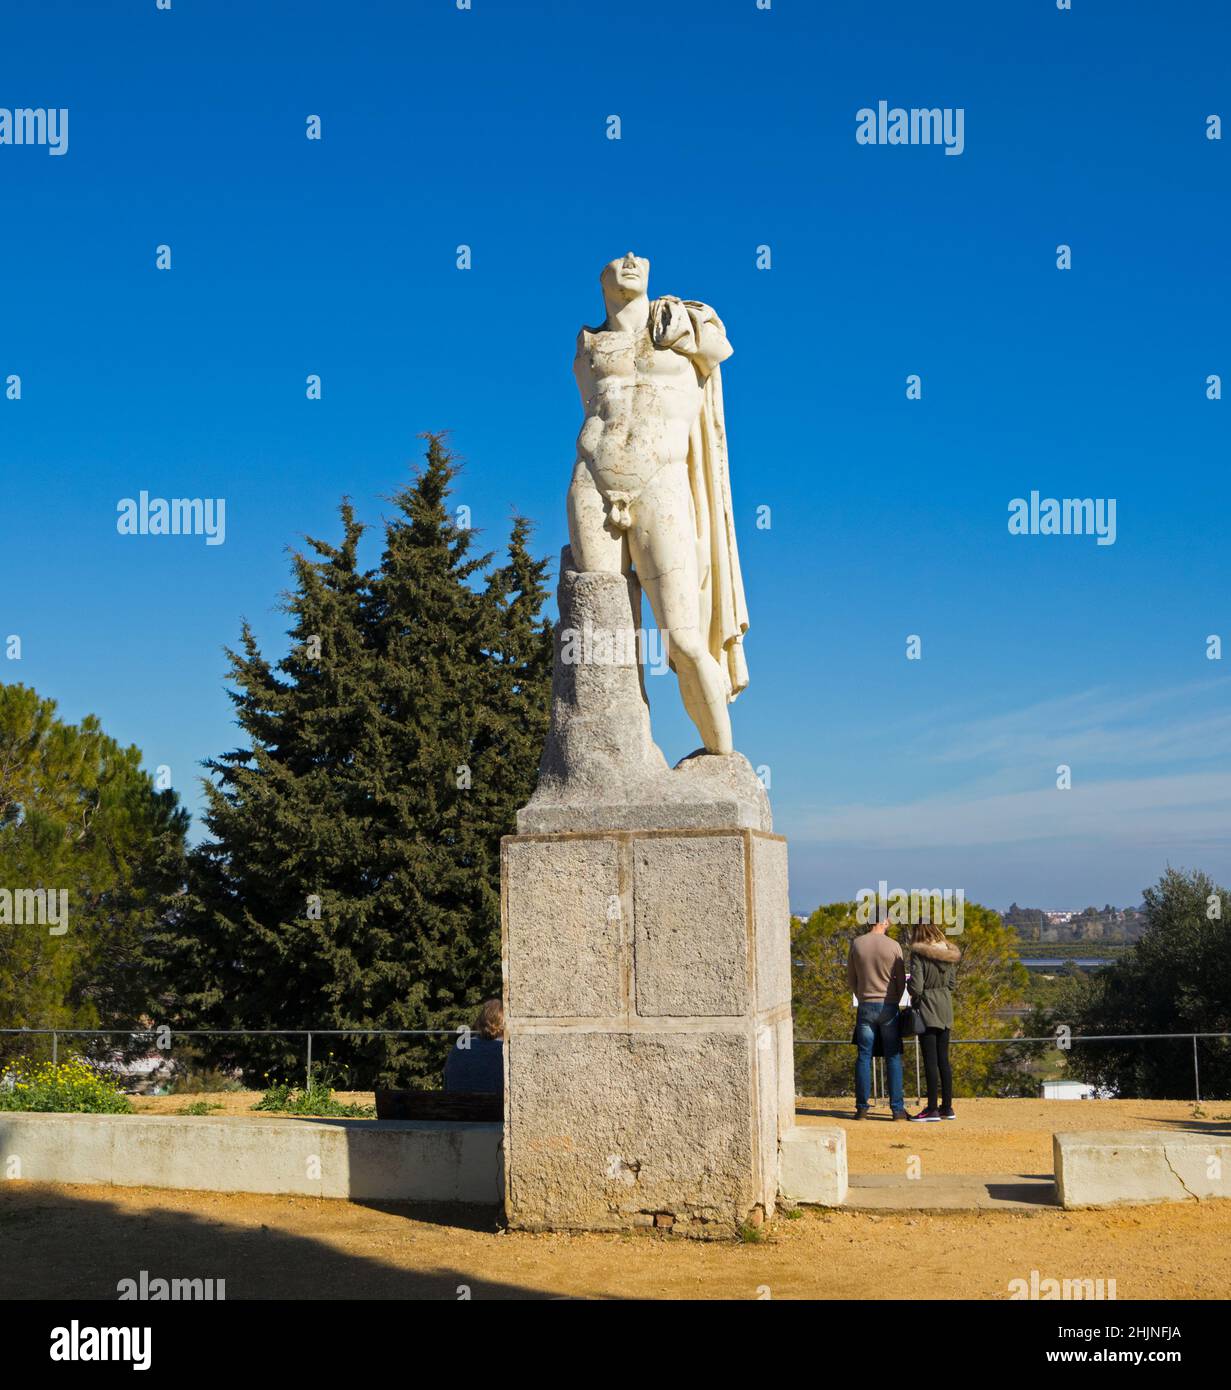 Roman city of Italica, near Santiponce, Seville Province, Andalusia, southern Spain.  Reproduction of an heroic statue of the Emperor Trajan.  The ori Stock Photo